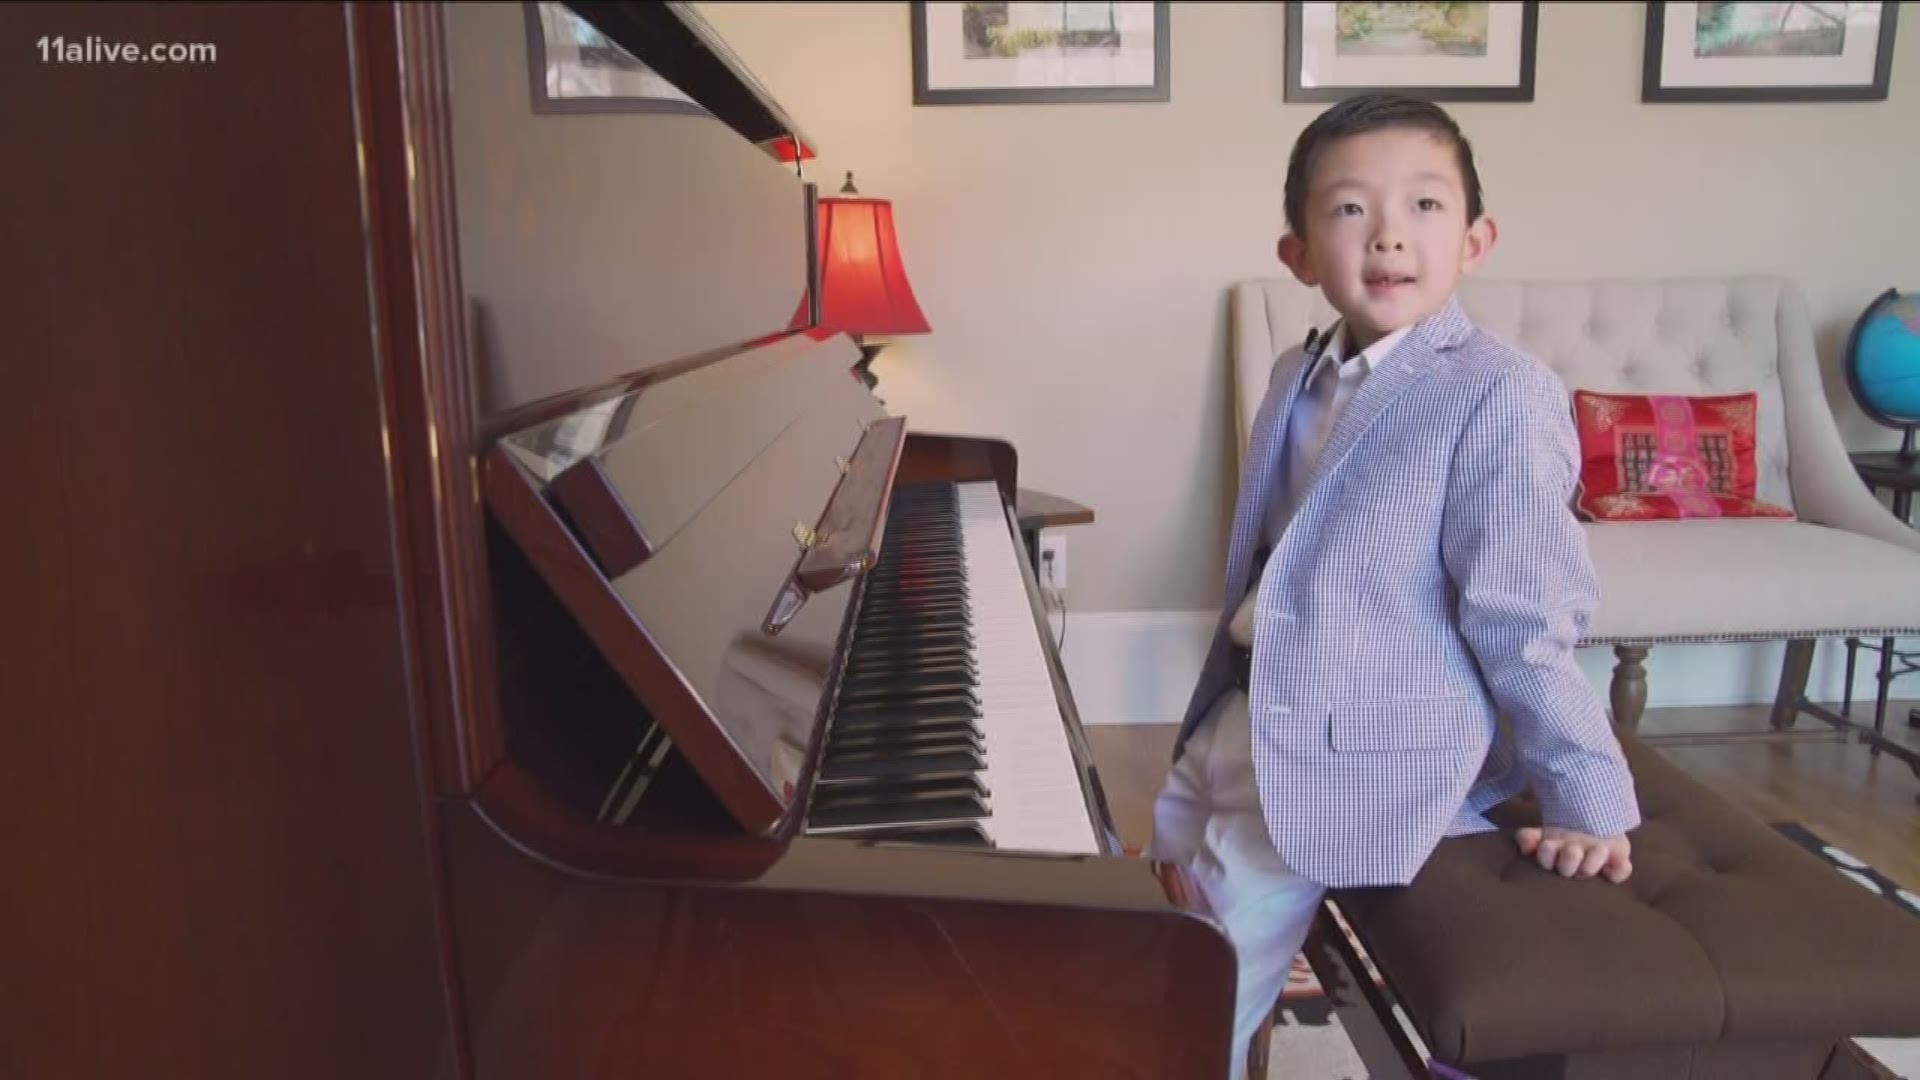 William is among the youngest participants – and the youngest Georgian – in the America’s Protégé Winners Recital, Sunday March 31 at the renowned concert hall.